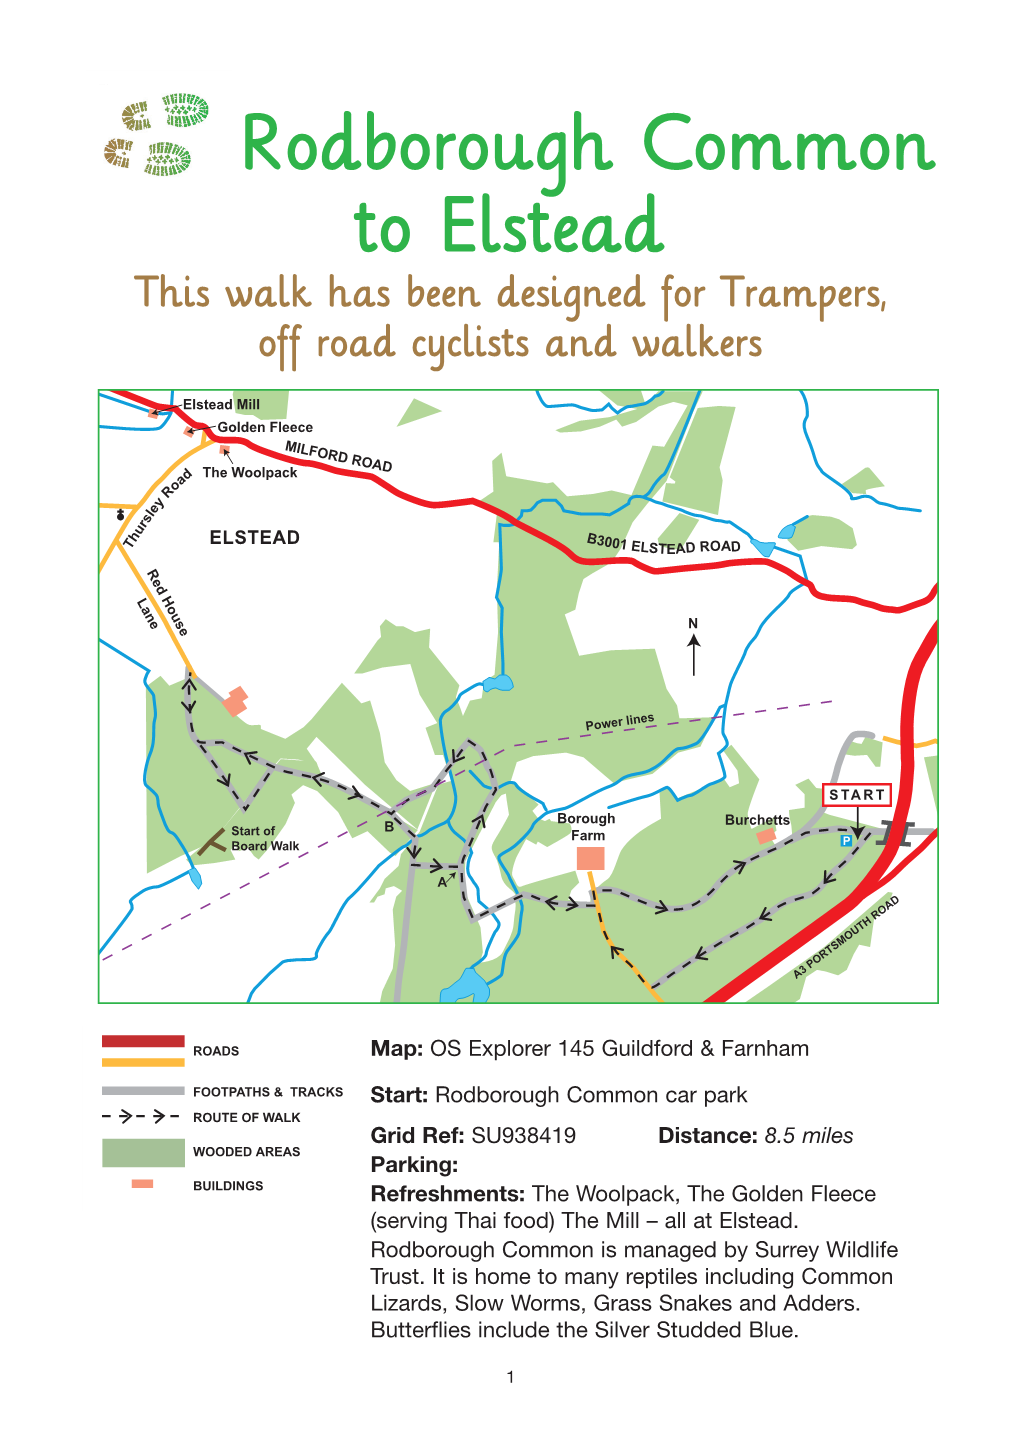 Rodborough Common to Elstead This Walk Has Been Designed for Trampers, Off Road Cyclists and Walkers